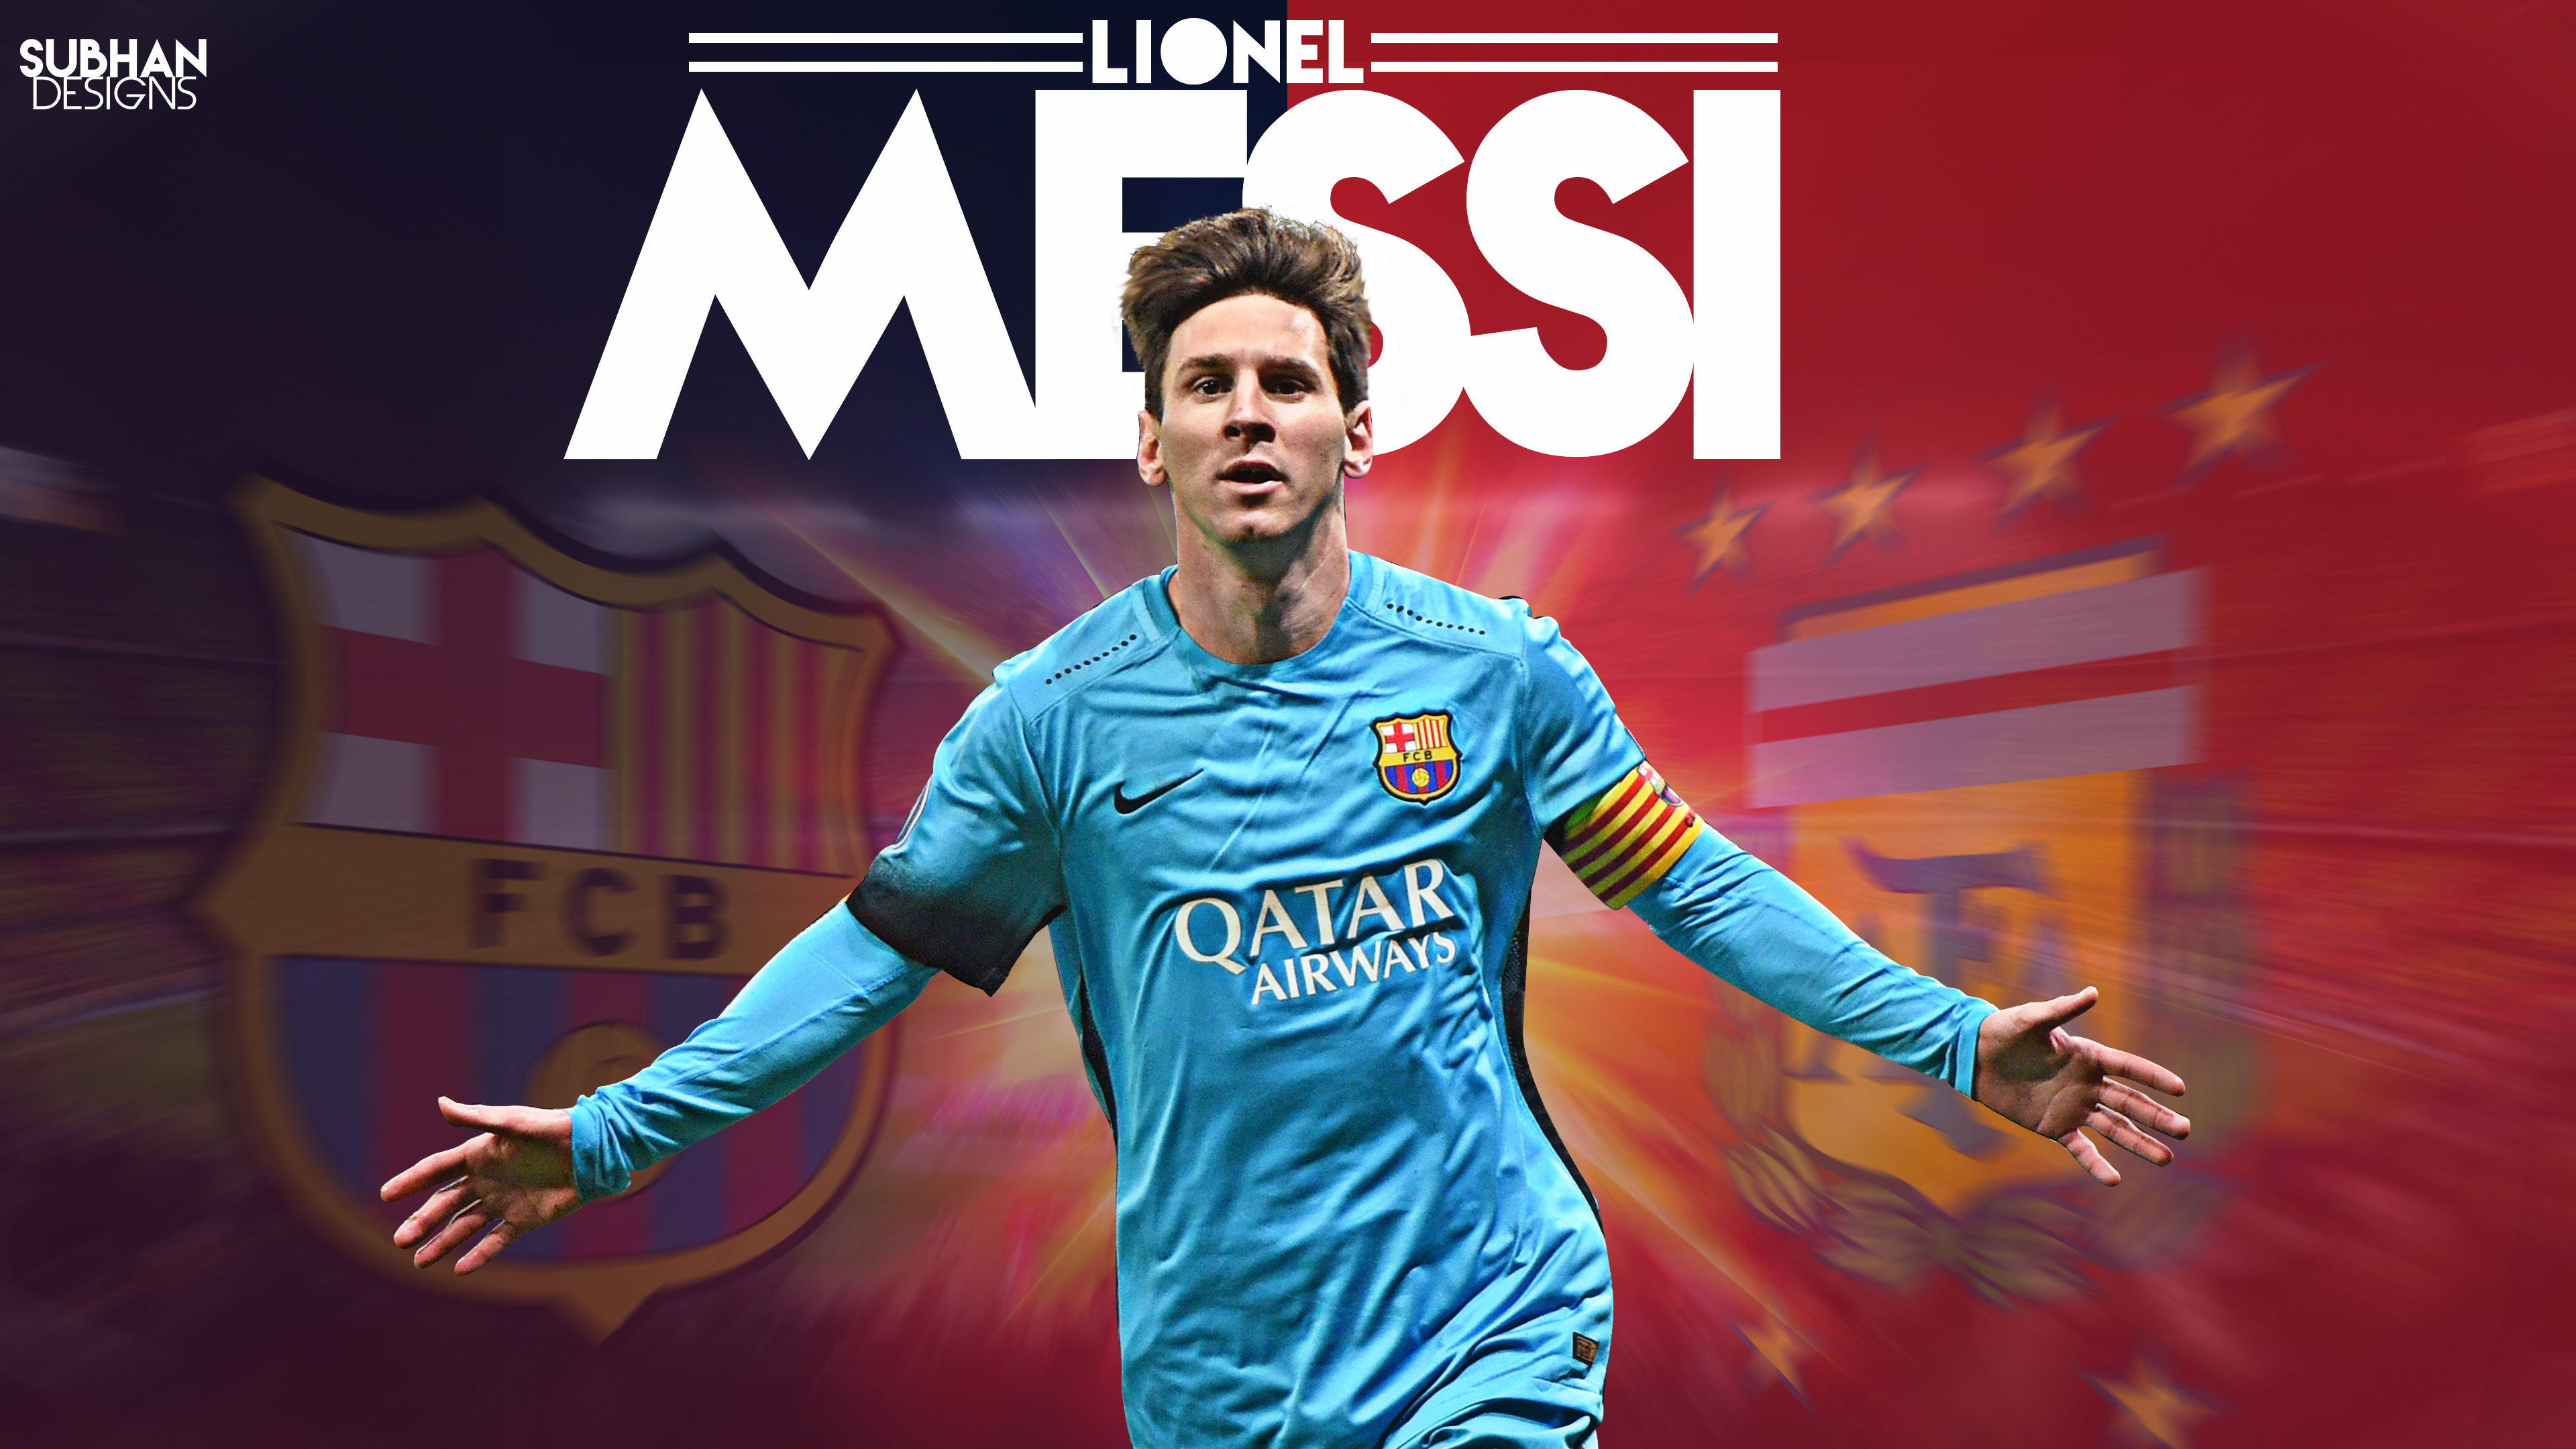 Lionel Messi 2016 wallpaper 4K by subhan22 on